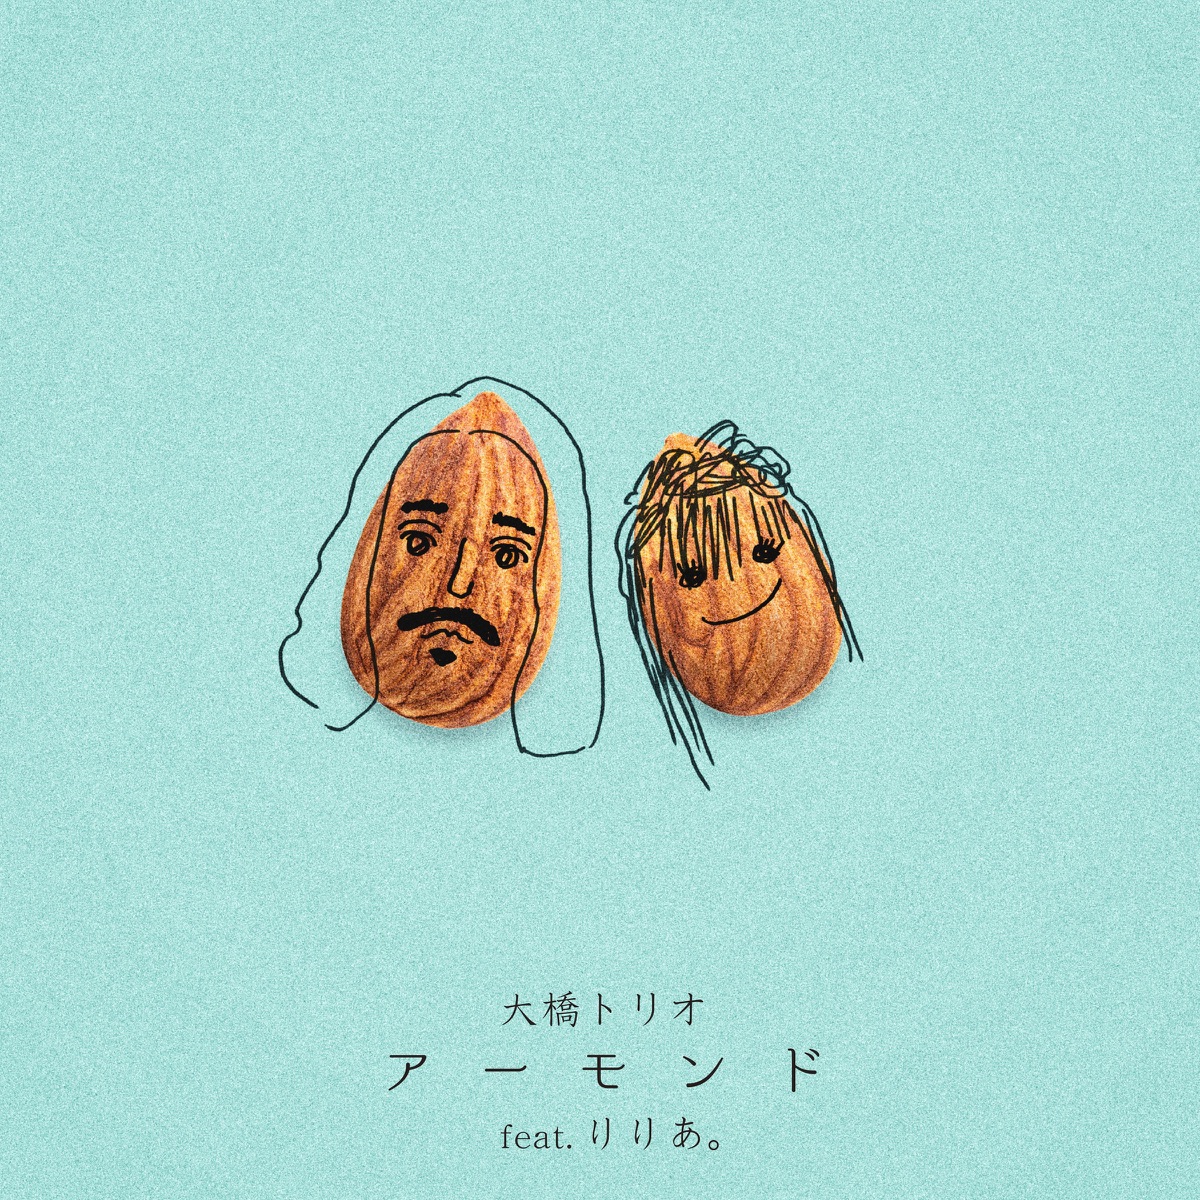 Cover art for『Ohashi Trio - Almond feat. Riria.』from the release『Almond feat. Riria.』